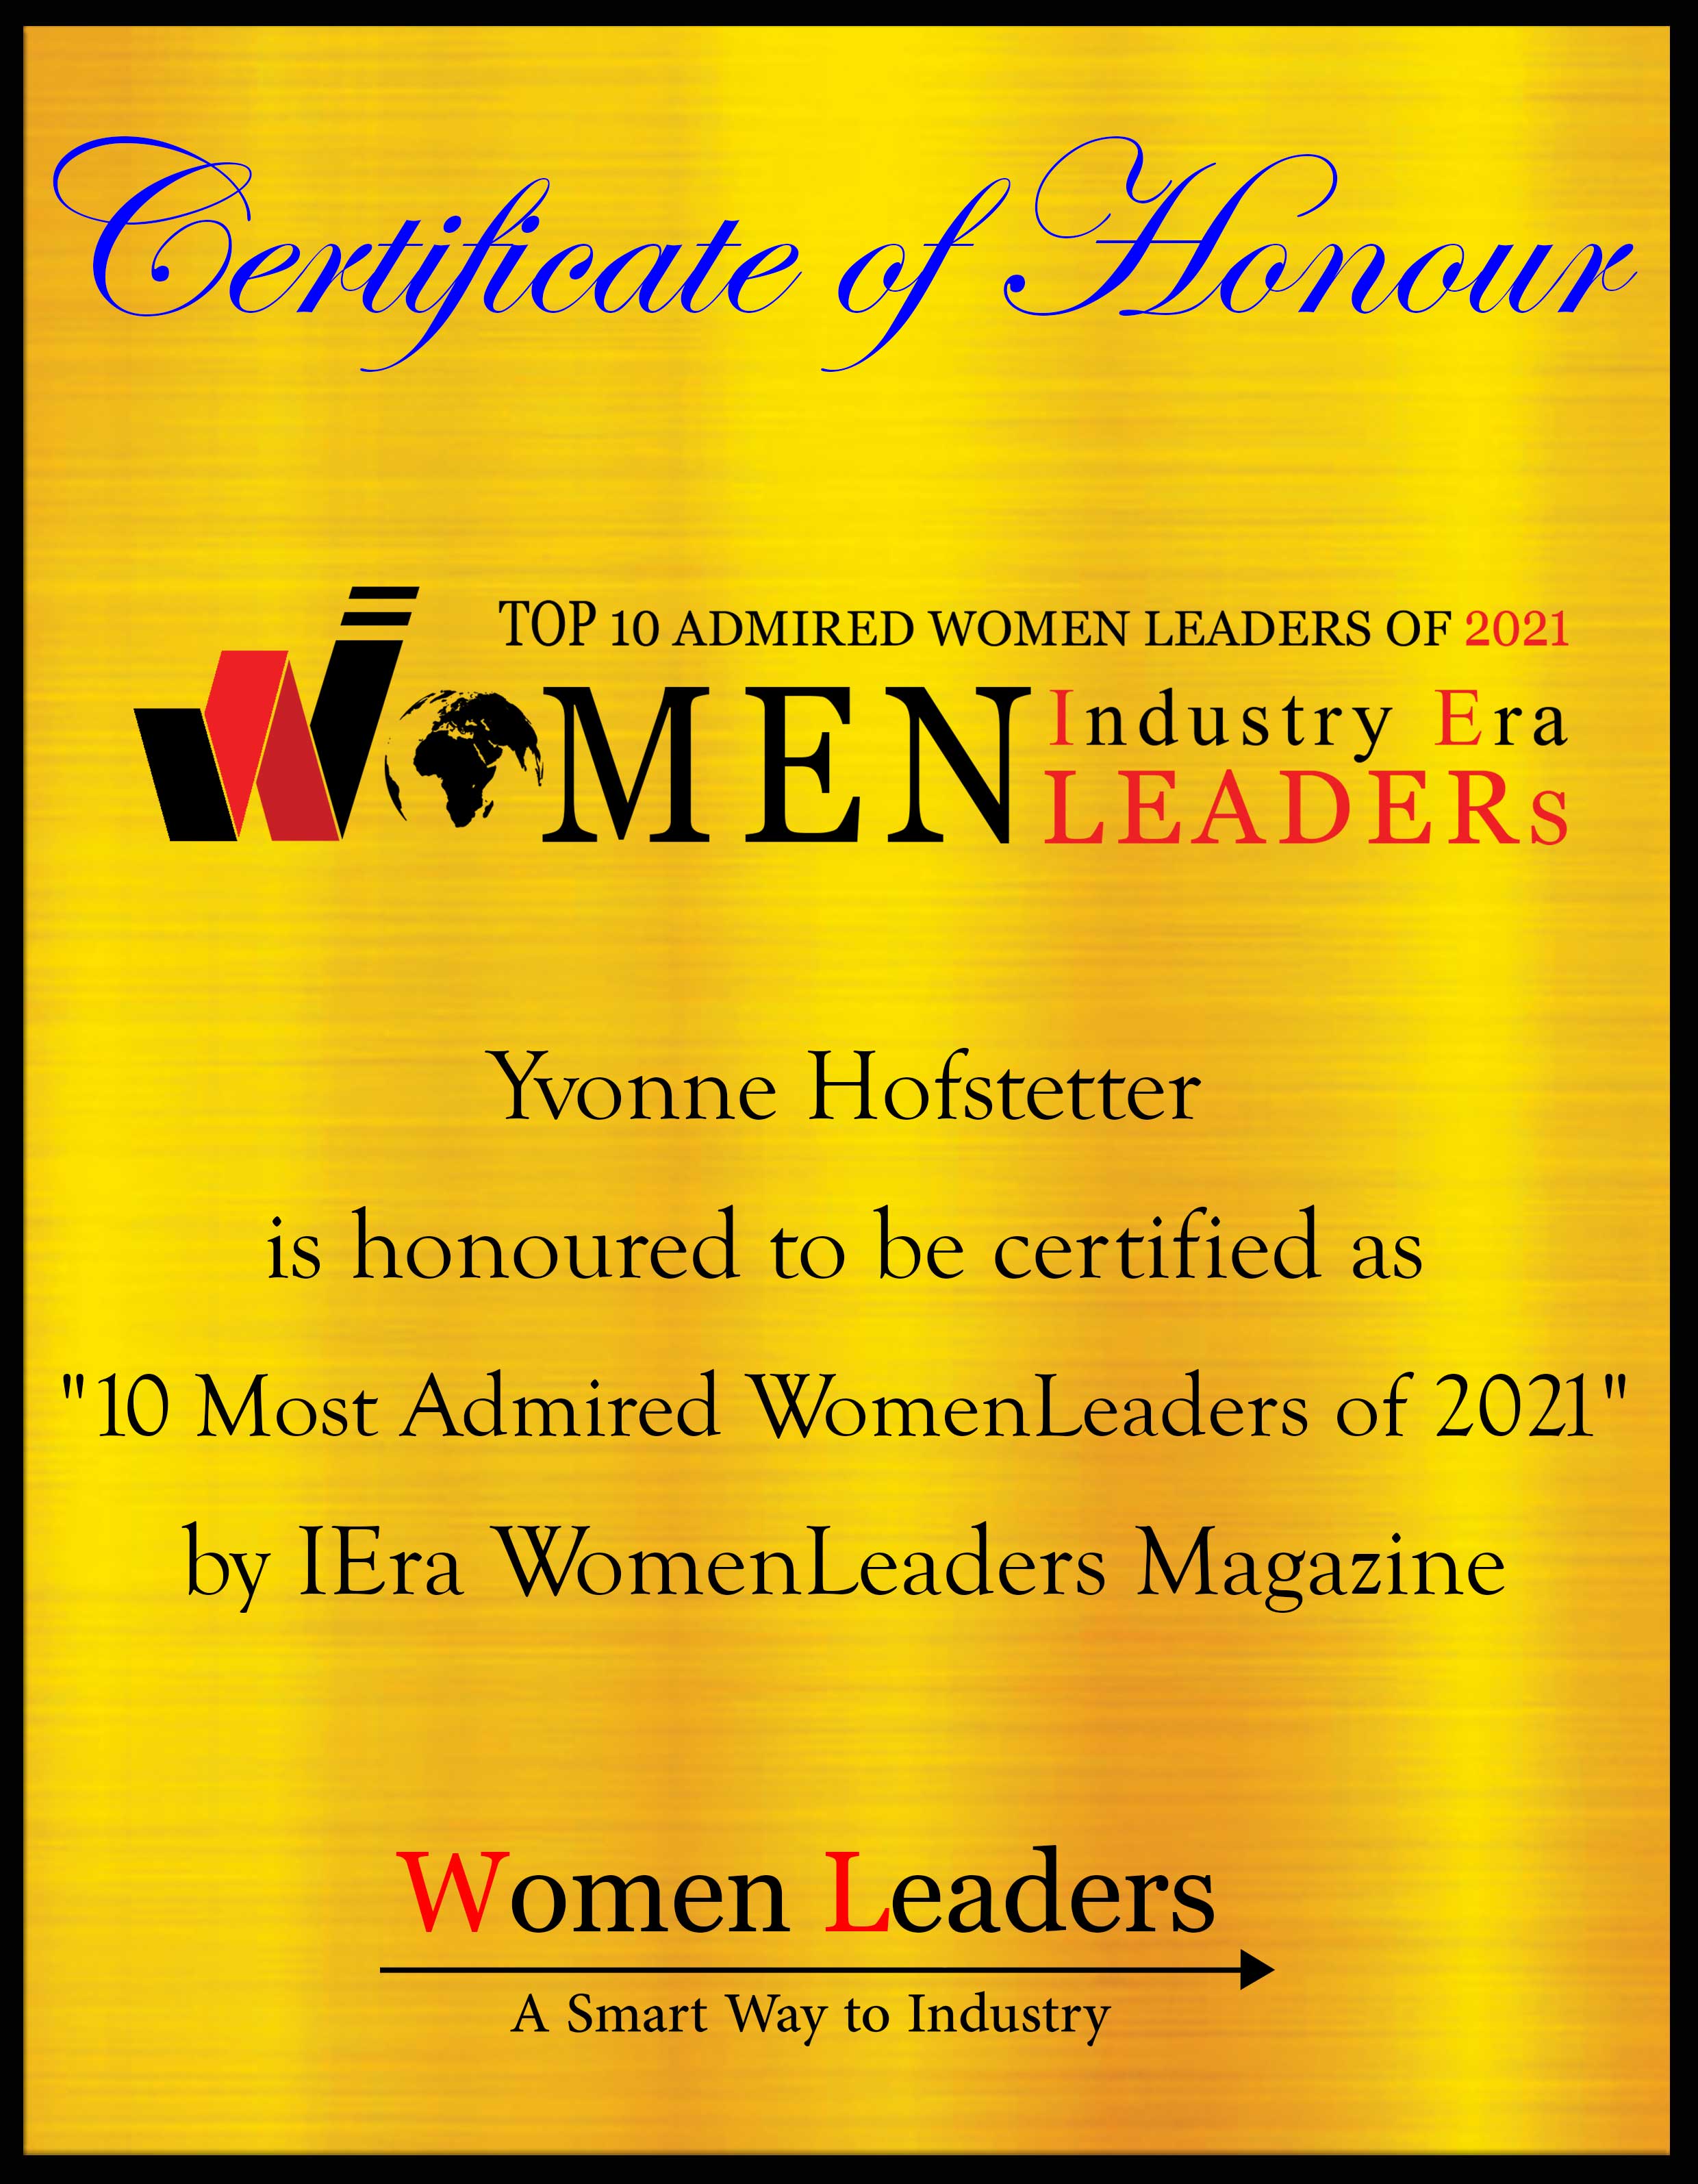 Yvonne Hofstetter, CEO & Co-Founder of 21strategies, Most Admired WomenLeaders of 2021